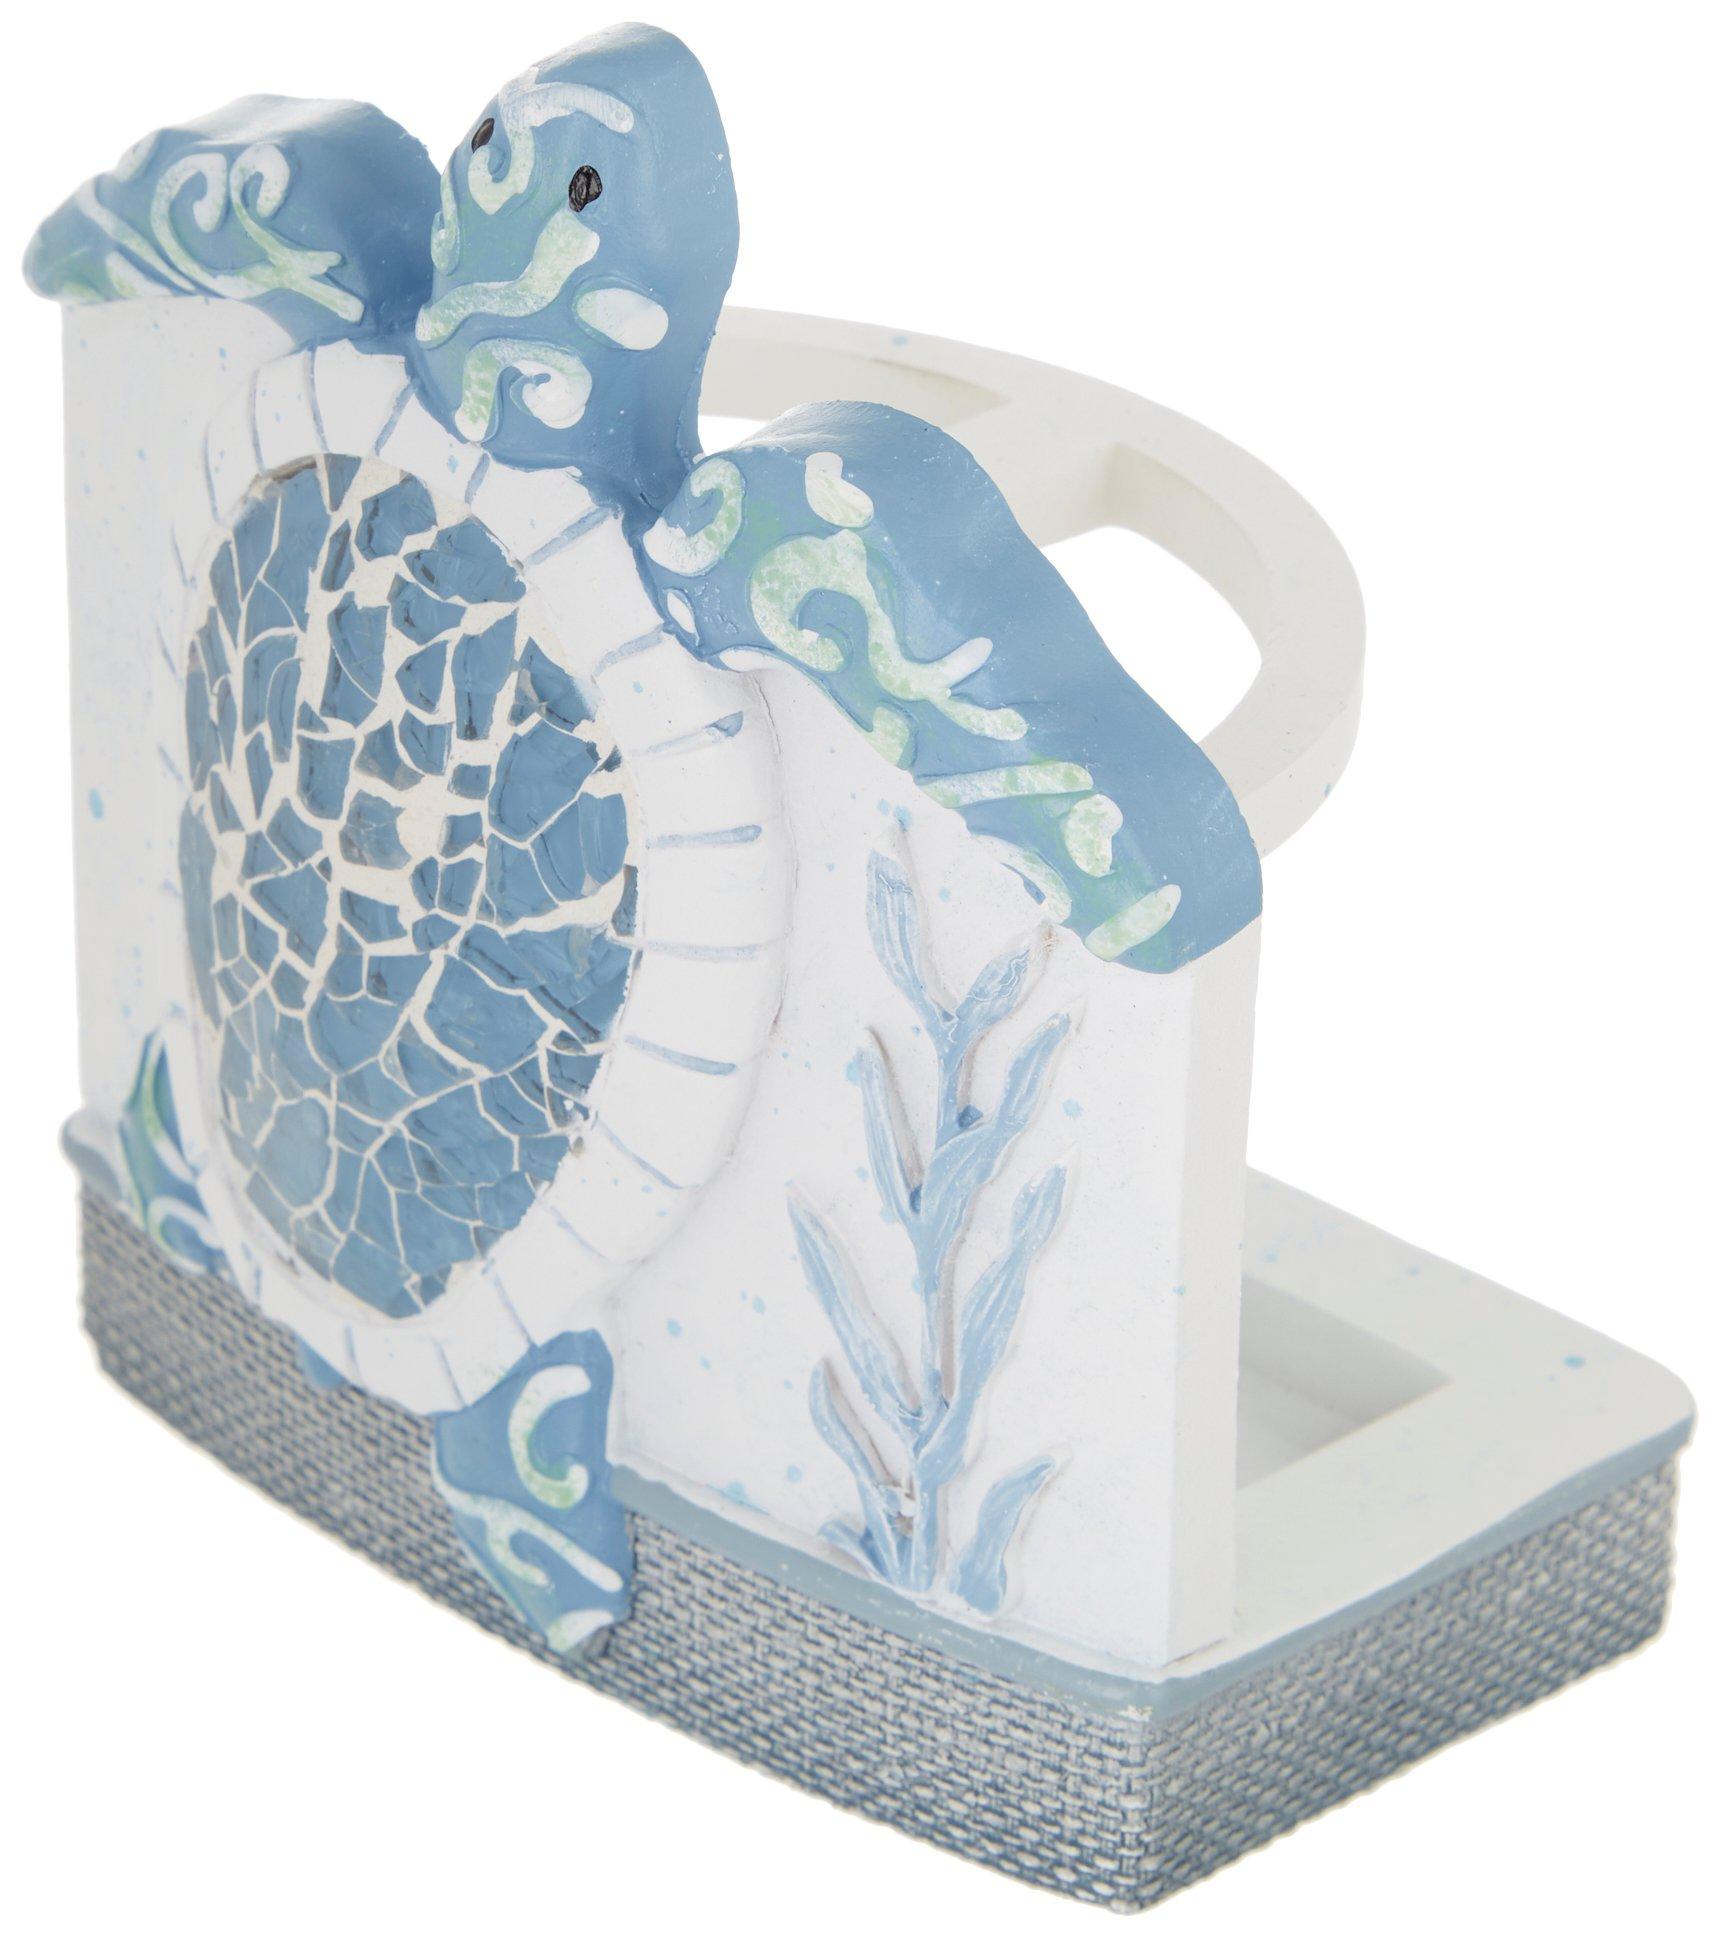 Caicos Turtle Toothbrush Holder